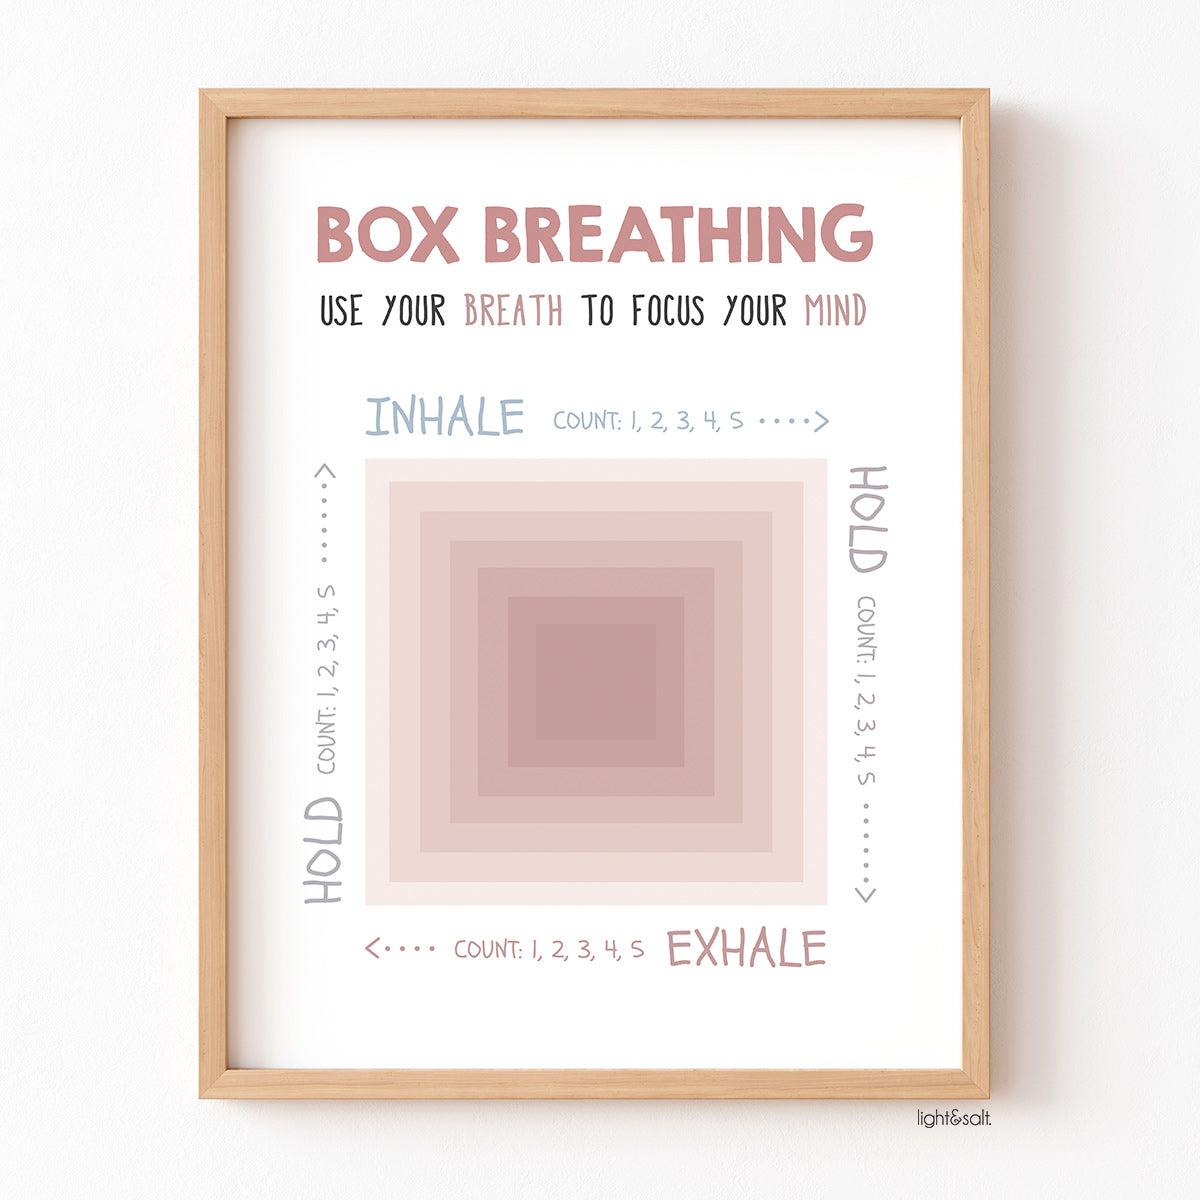 Box breathing mindfulness technique poster